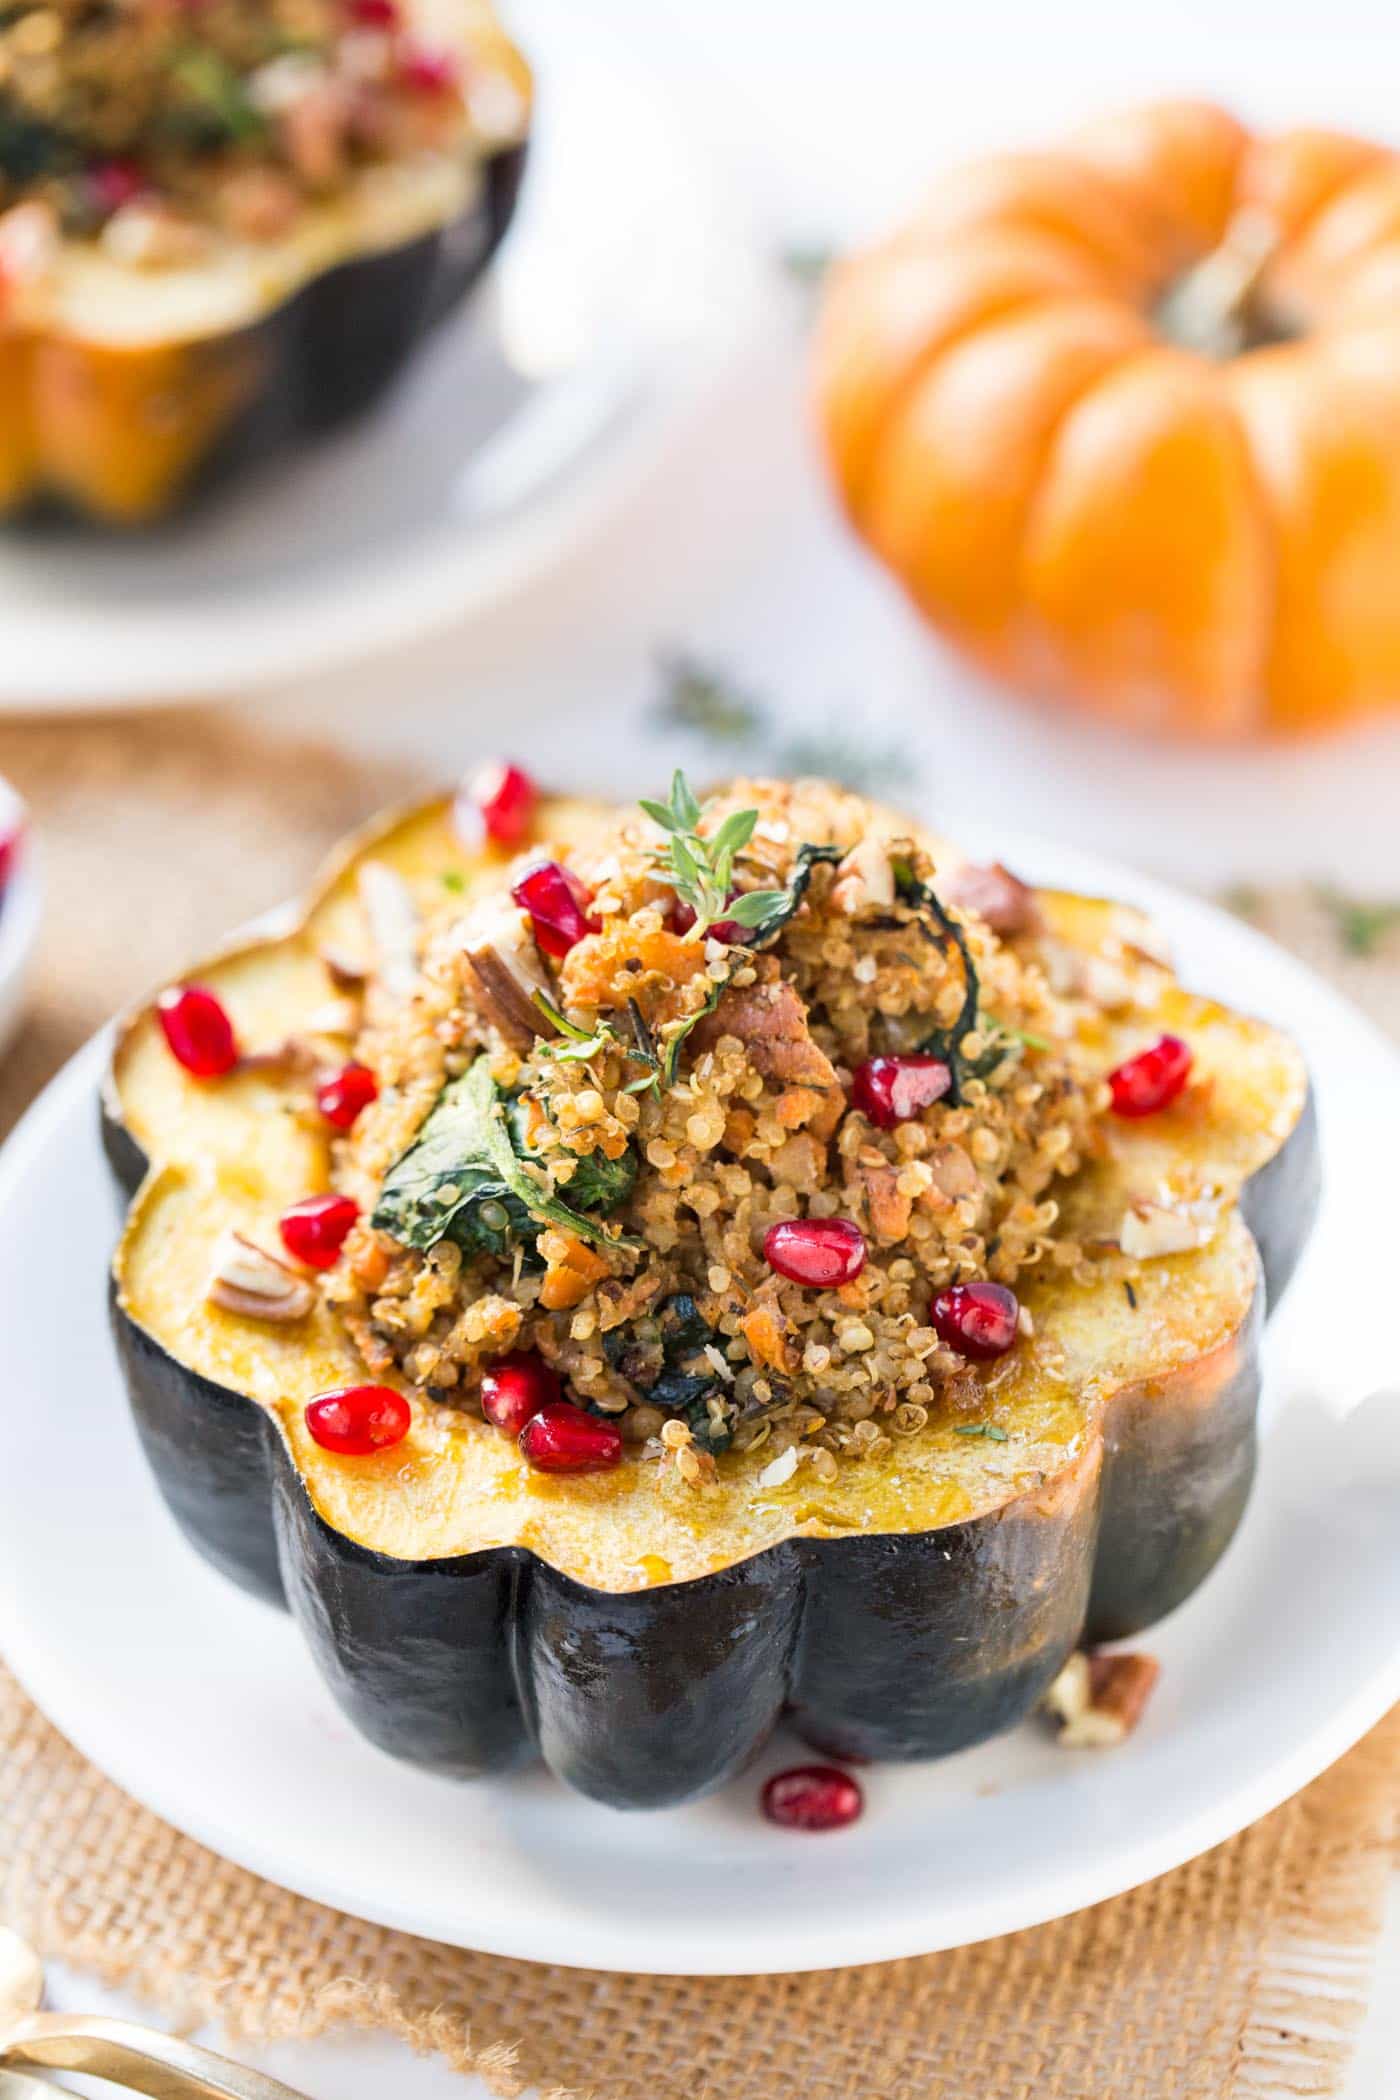 This super easy Quinoa Stuffed Acorn Squash recipe has a delicious plant-based filling using mushrooms, carrots, spinach and pecans!